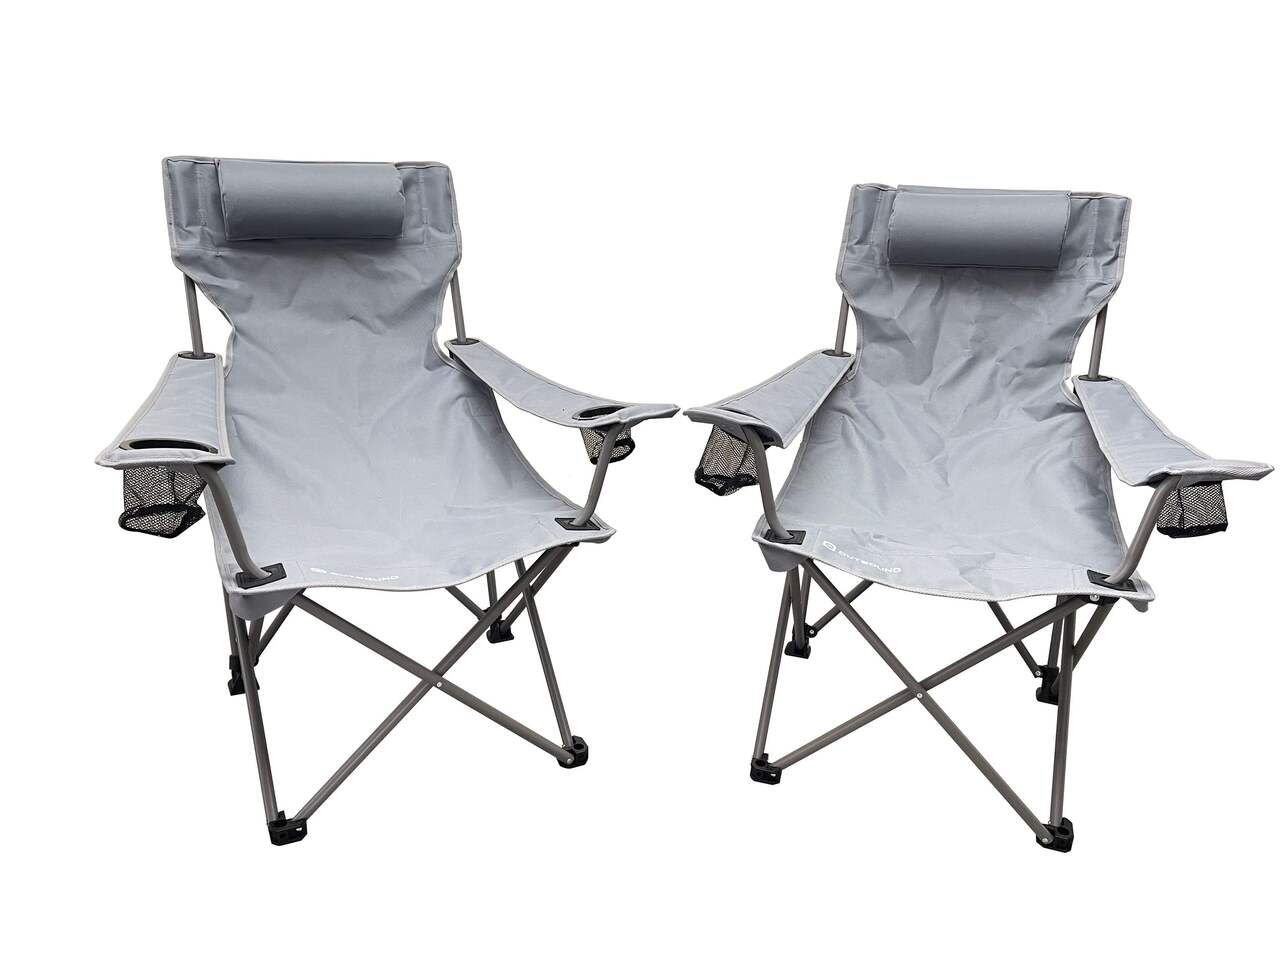 Outbound Quad-Fold Lounge Chair for Outdoor/Camping, 2-Piece, Grey